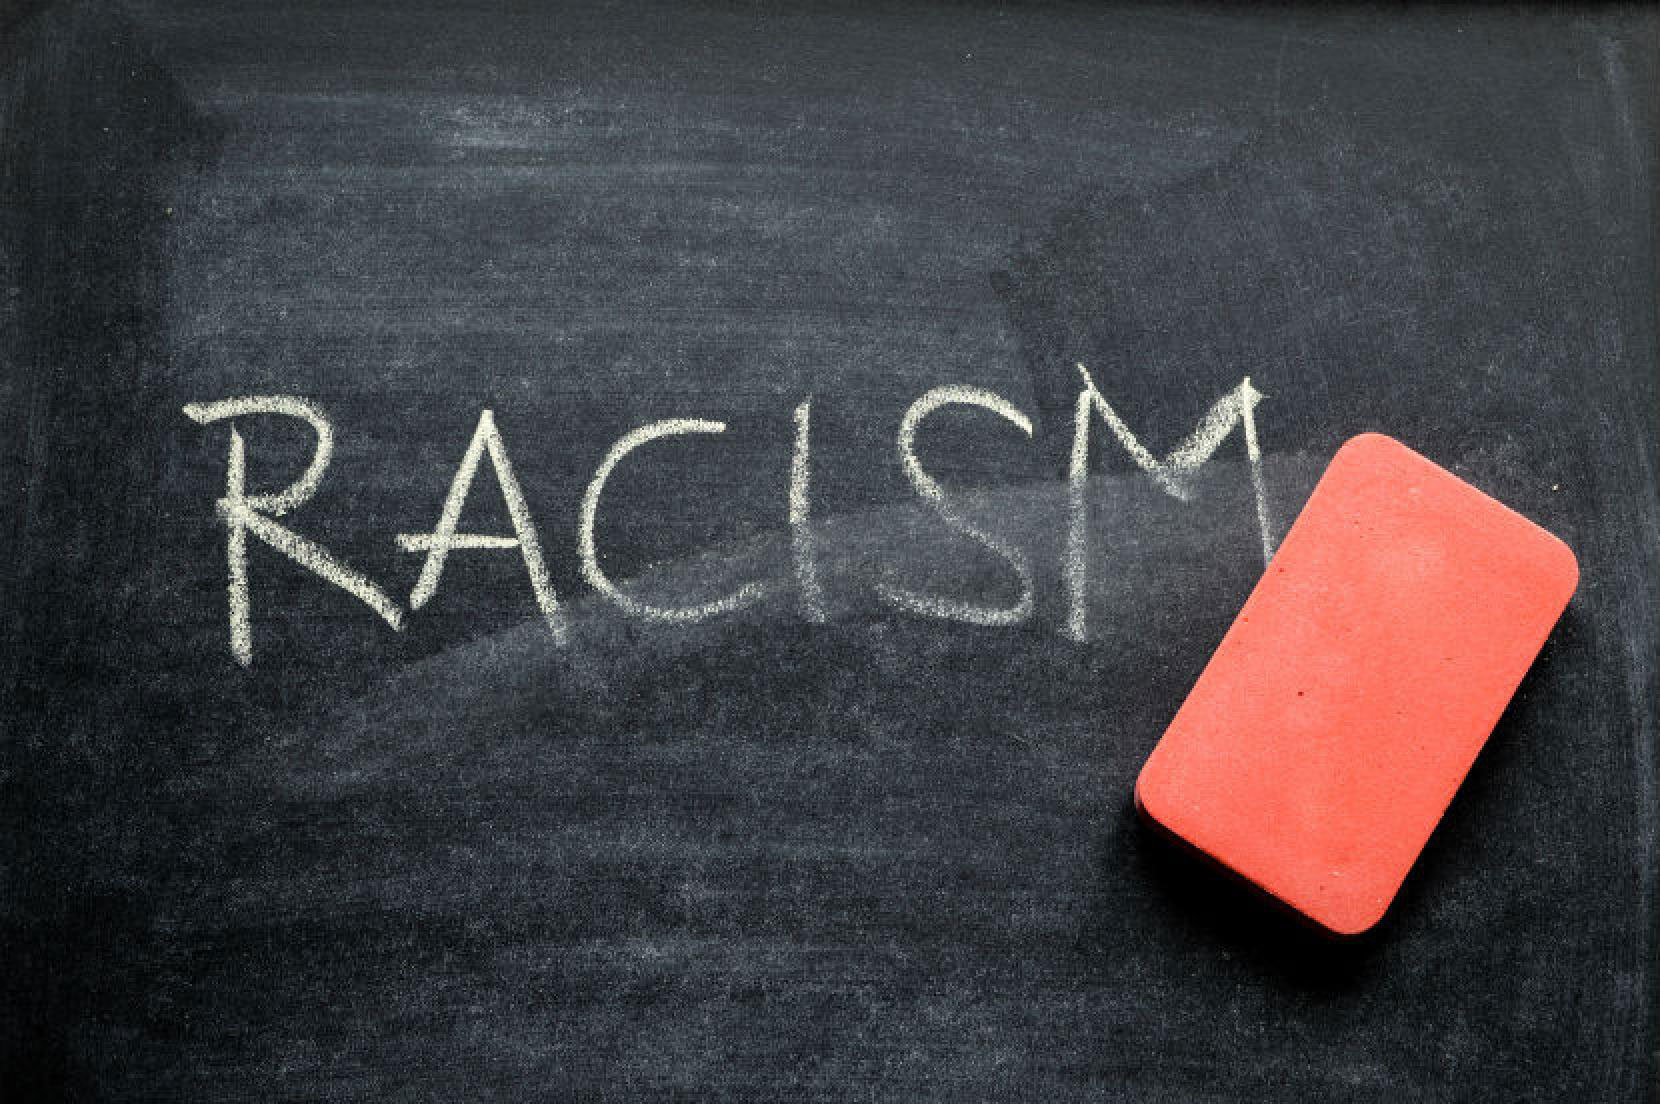 Existing While Black? Irrational Fears of People of Color is the New Breed of Racism